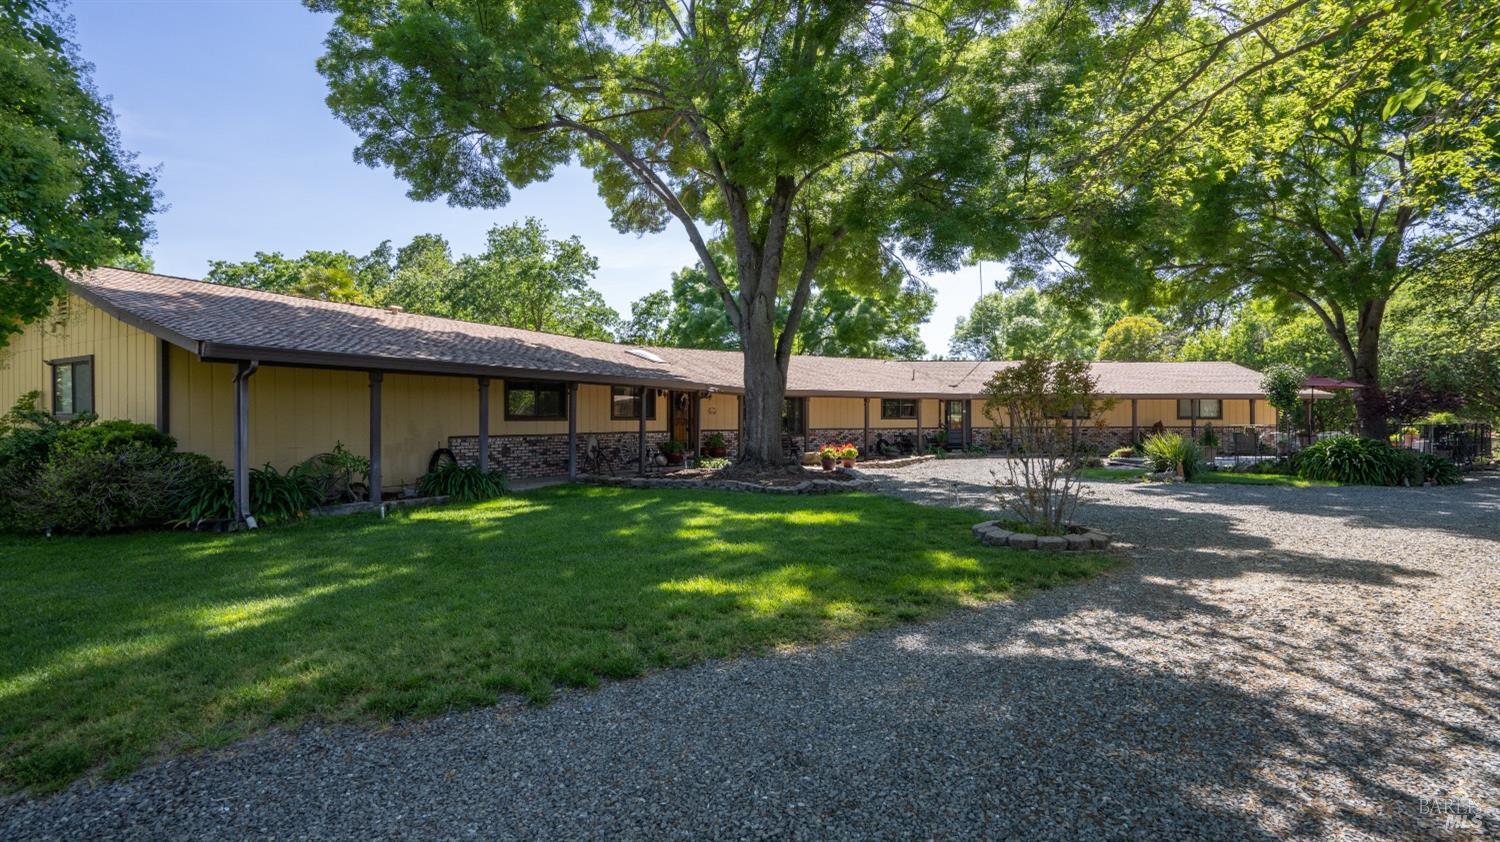 Photo of 4384 Peaceful Glen Rd in Vacaville, CA